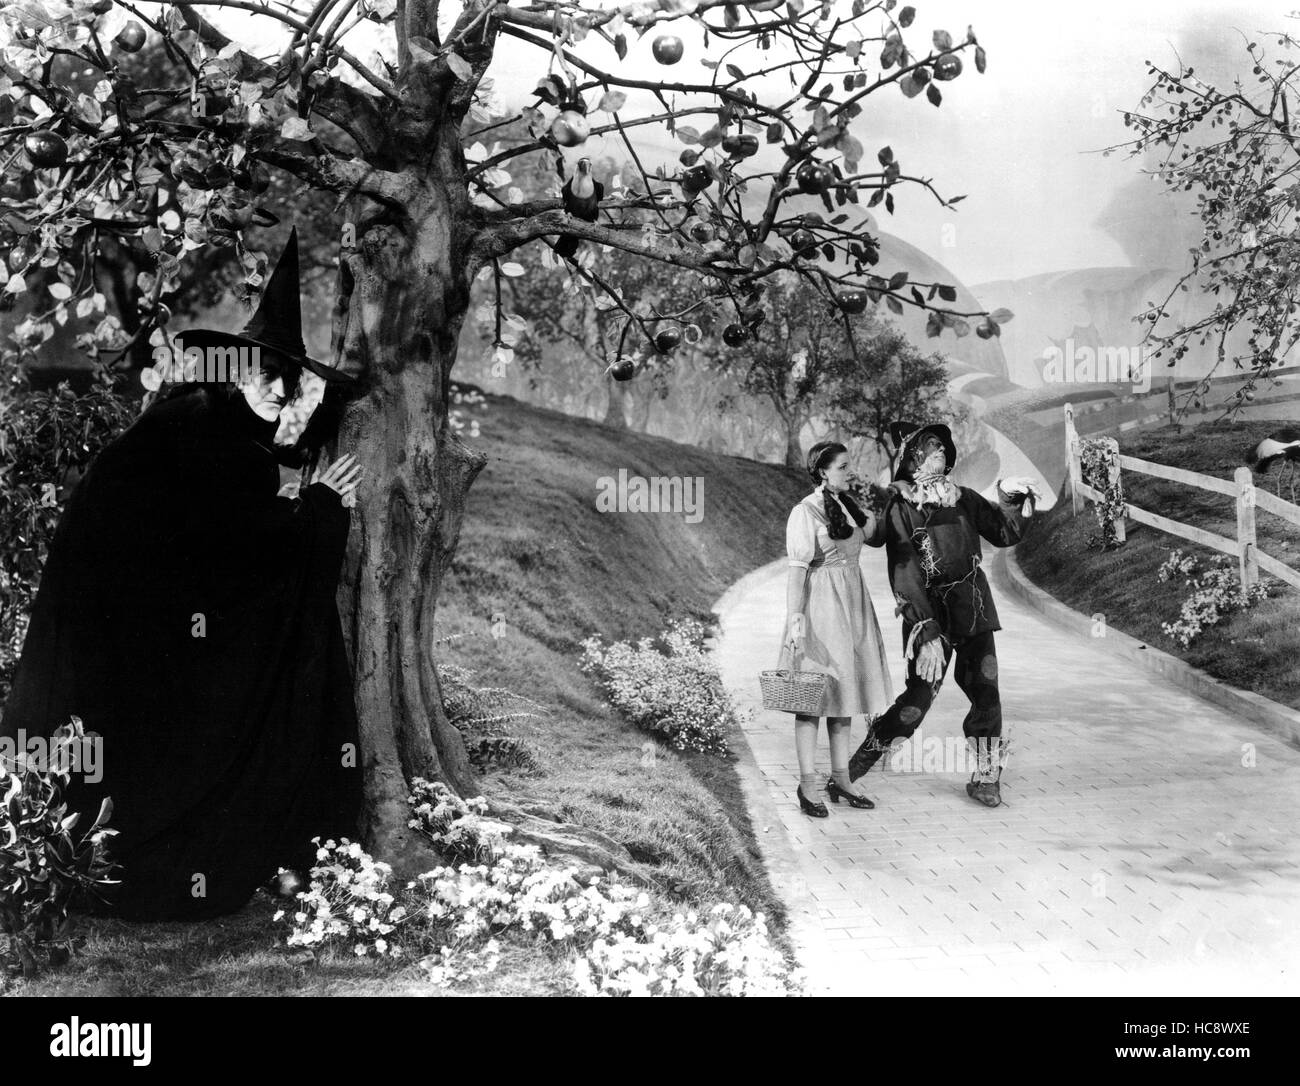 THE WIZARD OF OZ, Margaret Hamilton, Judy Garland and Ray Bolger, 1939 ...